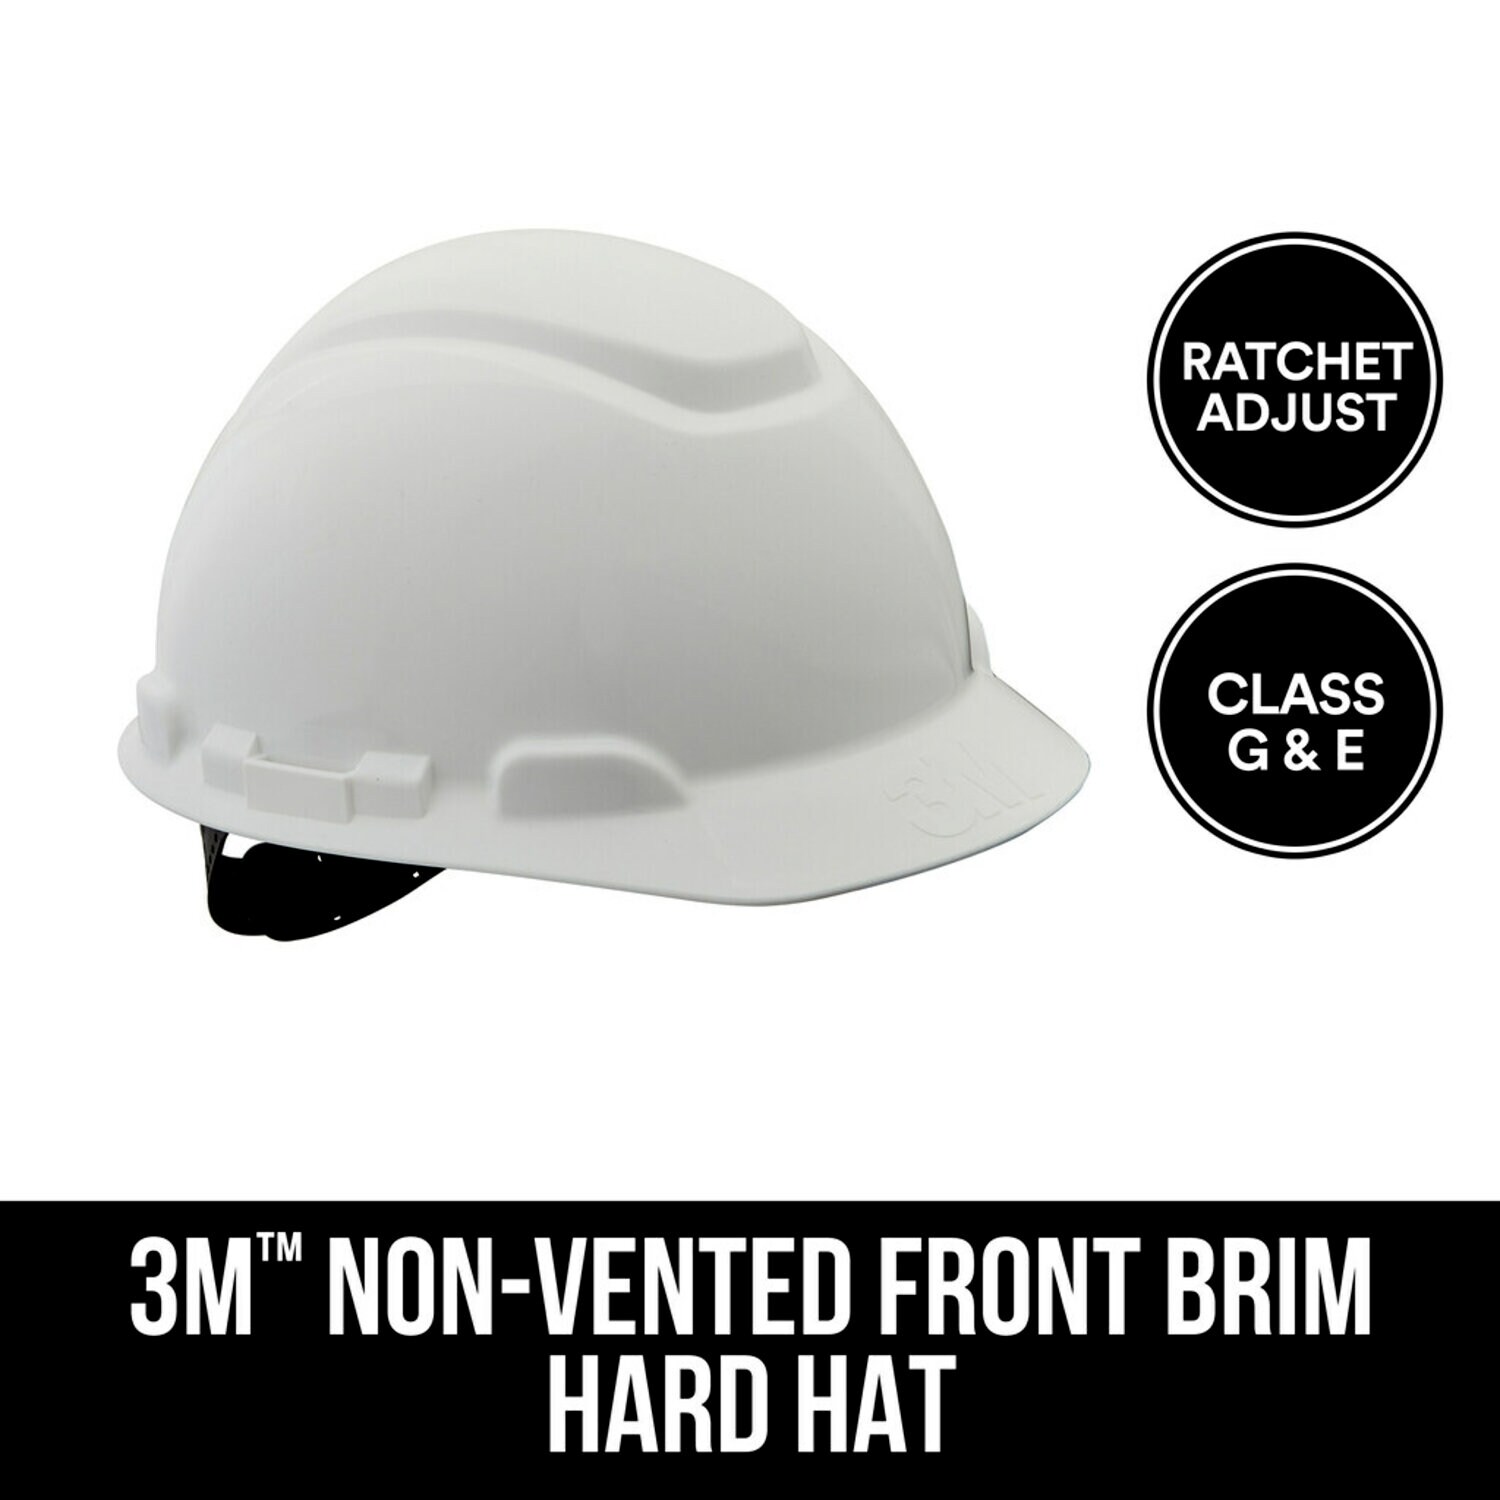 7100119483 - 3M Non-Vented Hard Hat with Ratchet Adjustment CHH-R-W6-PS, 6/case